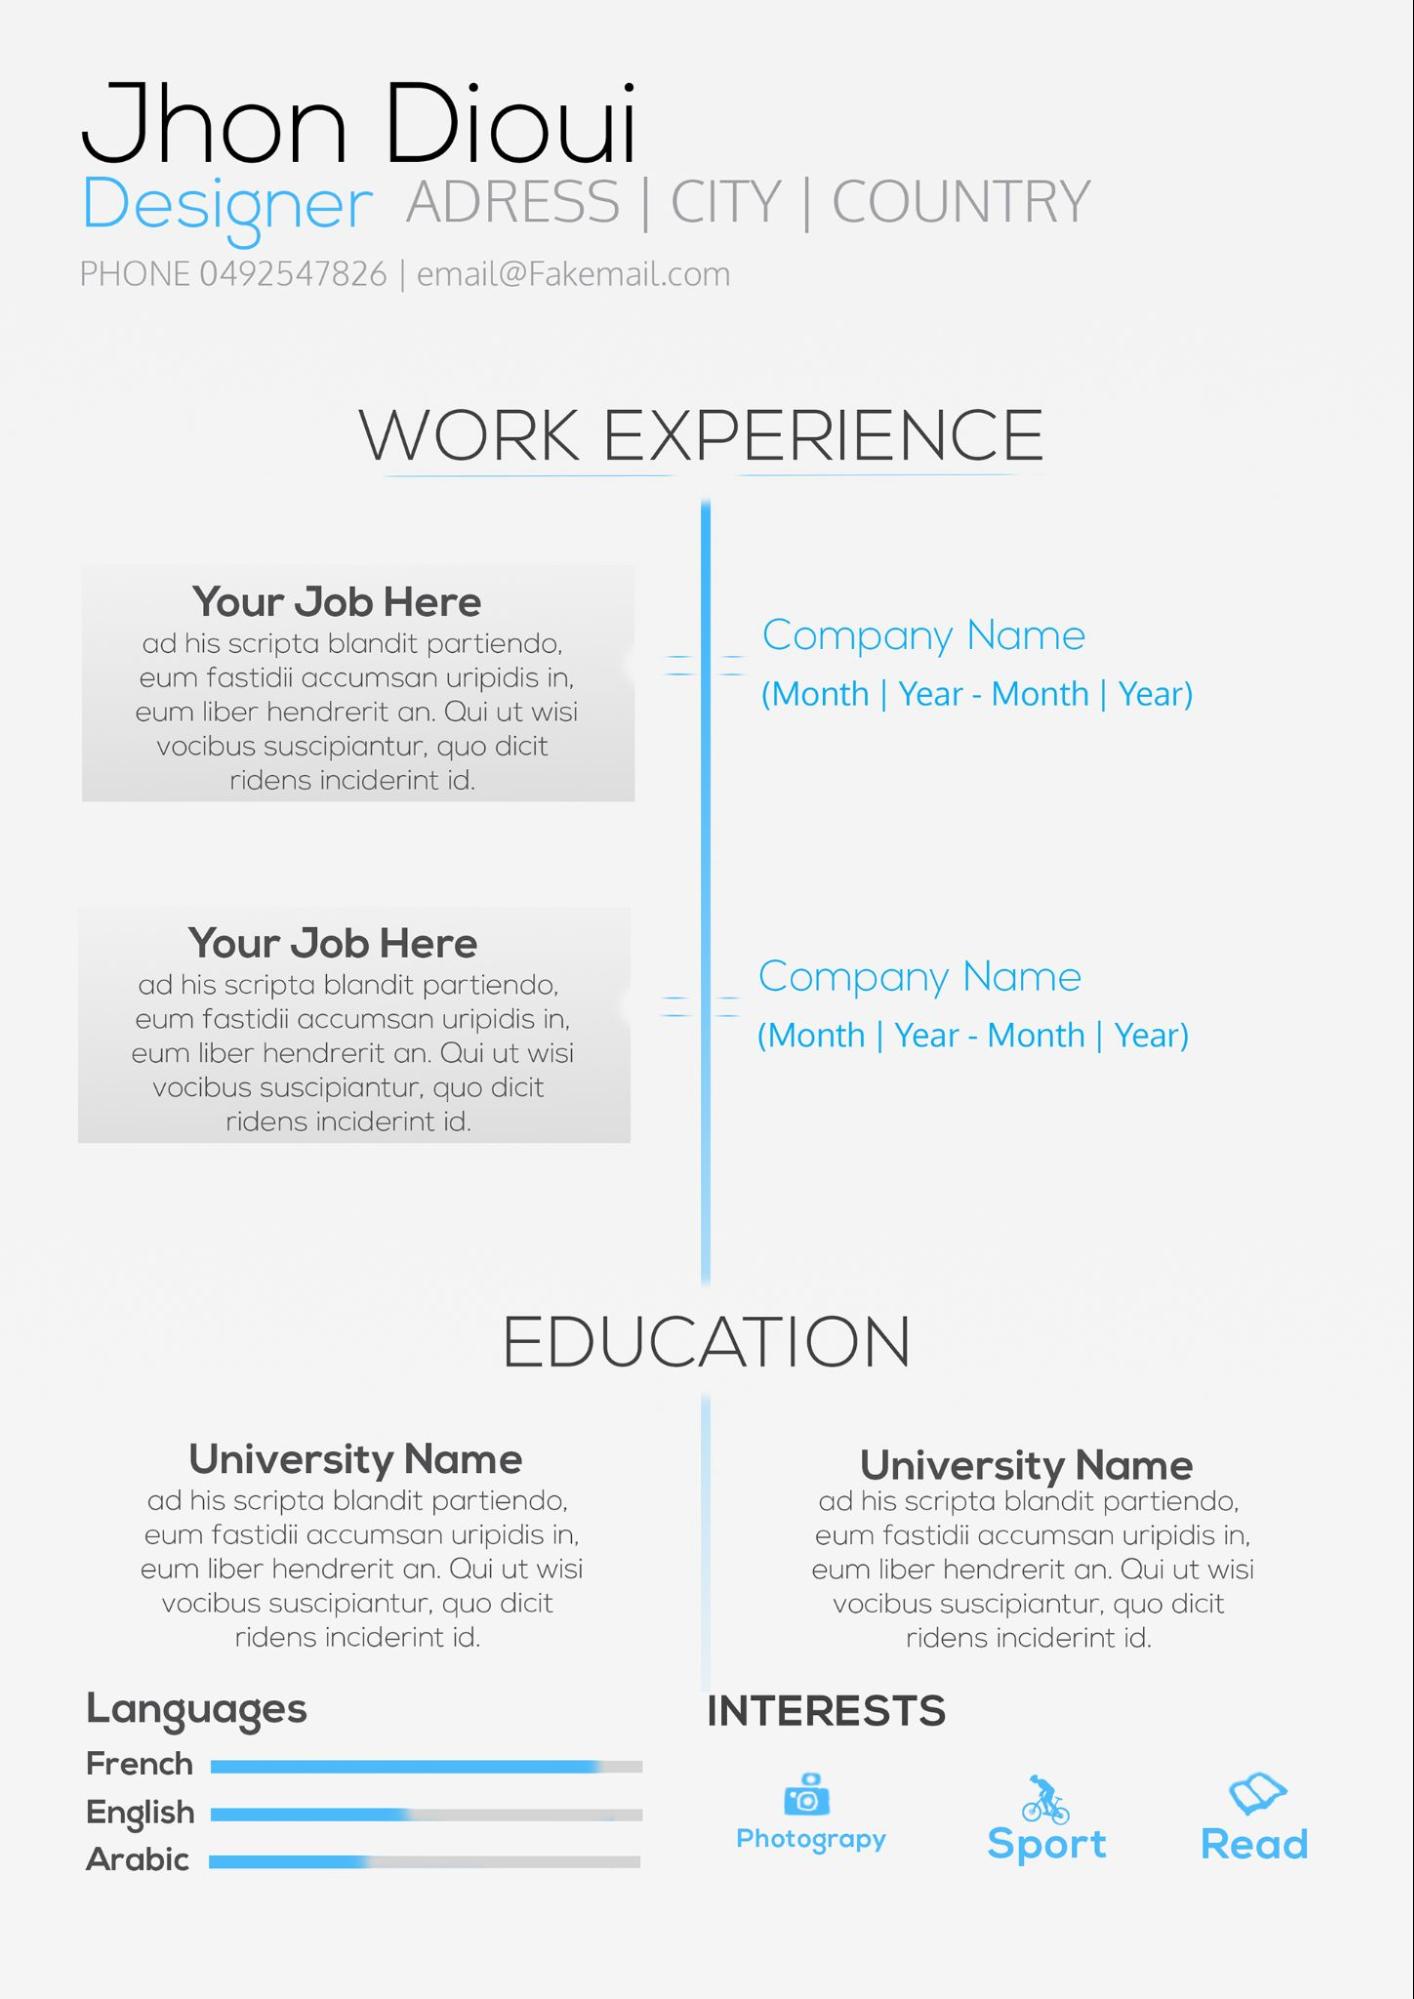 Experience-Oriented Resume Template